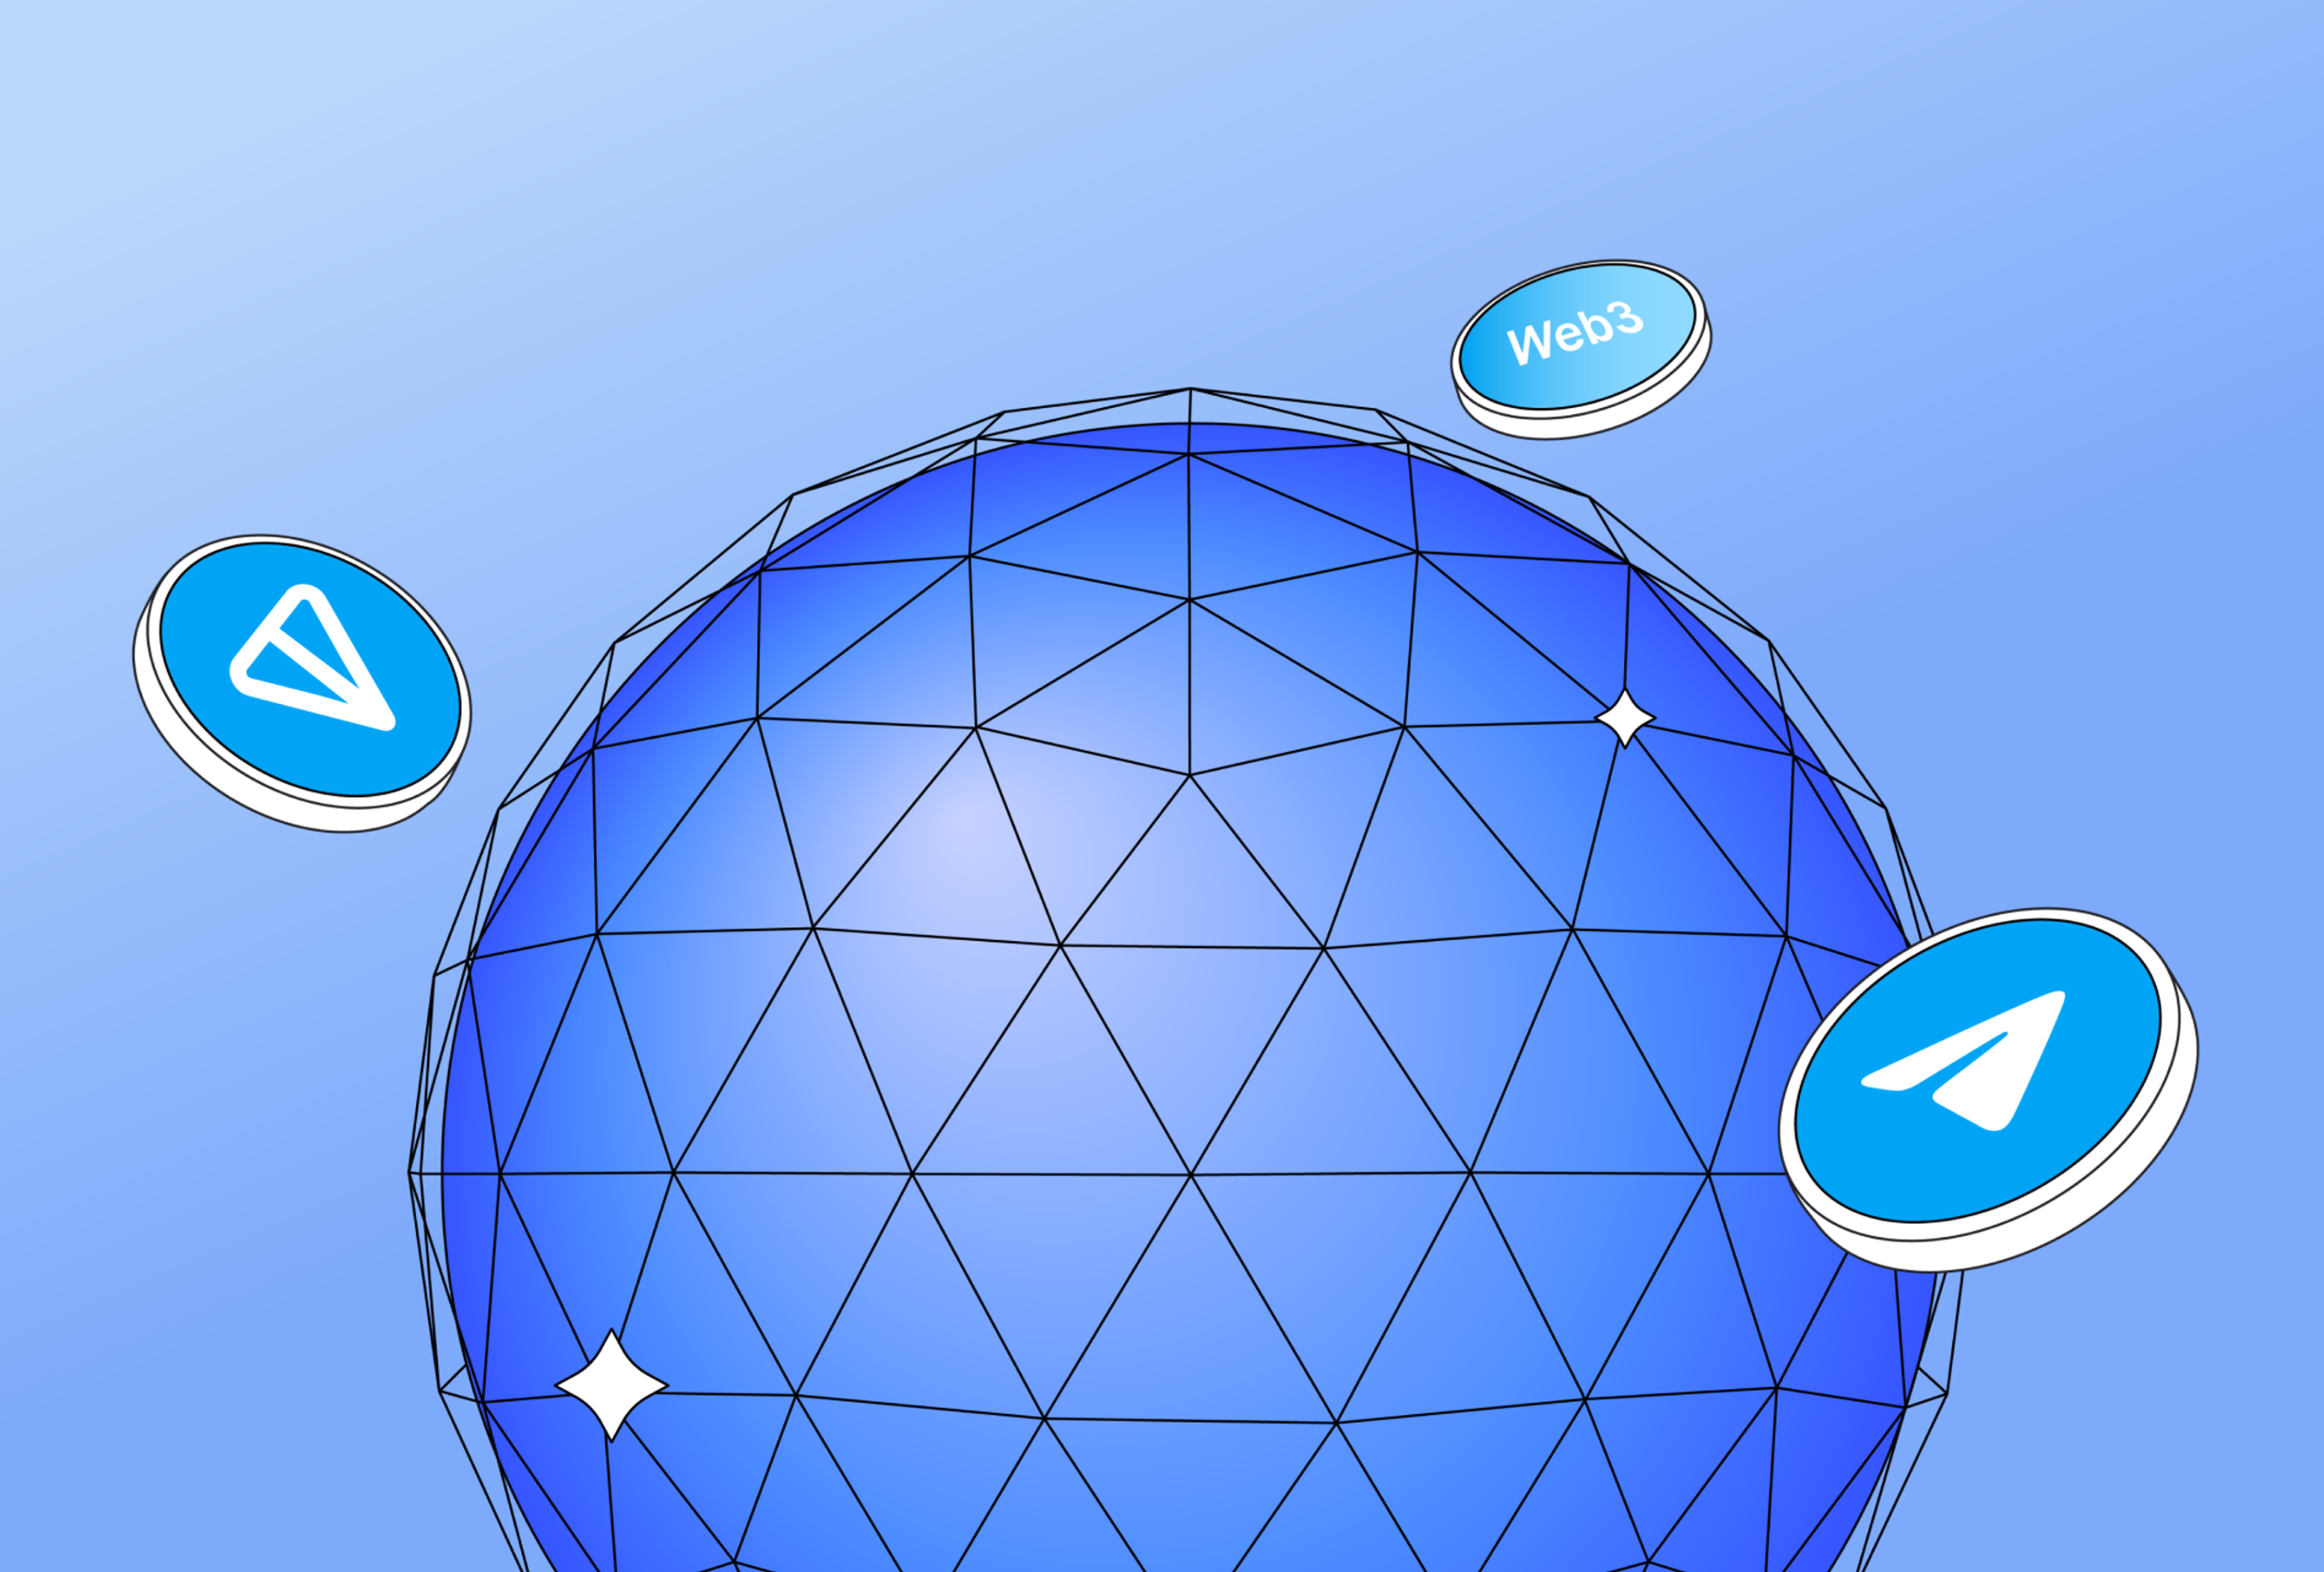 A cartoonish globe with wire around it and floating TON, telegram and web3 coins 